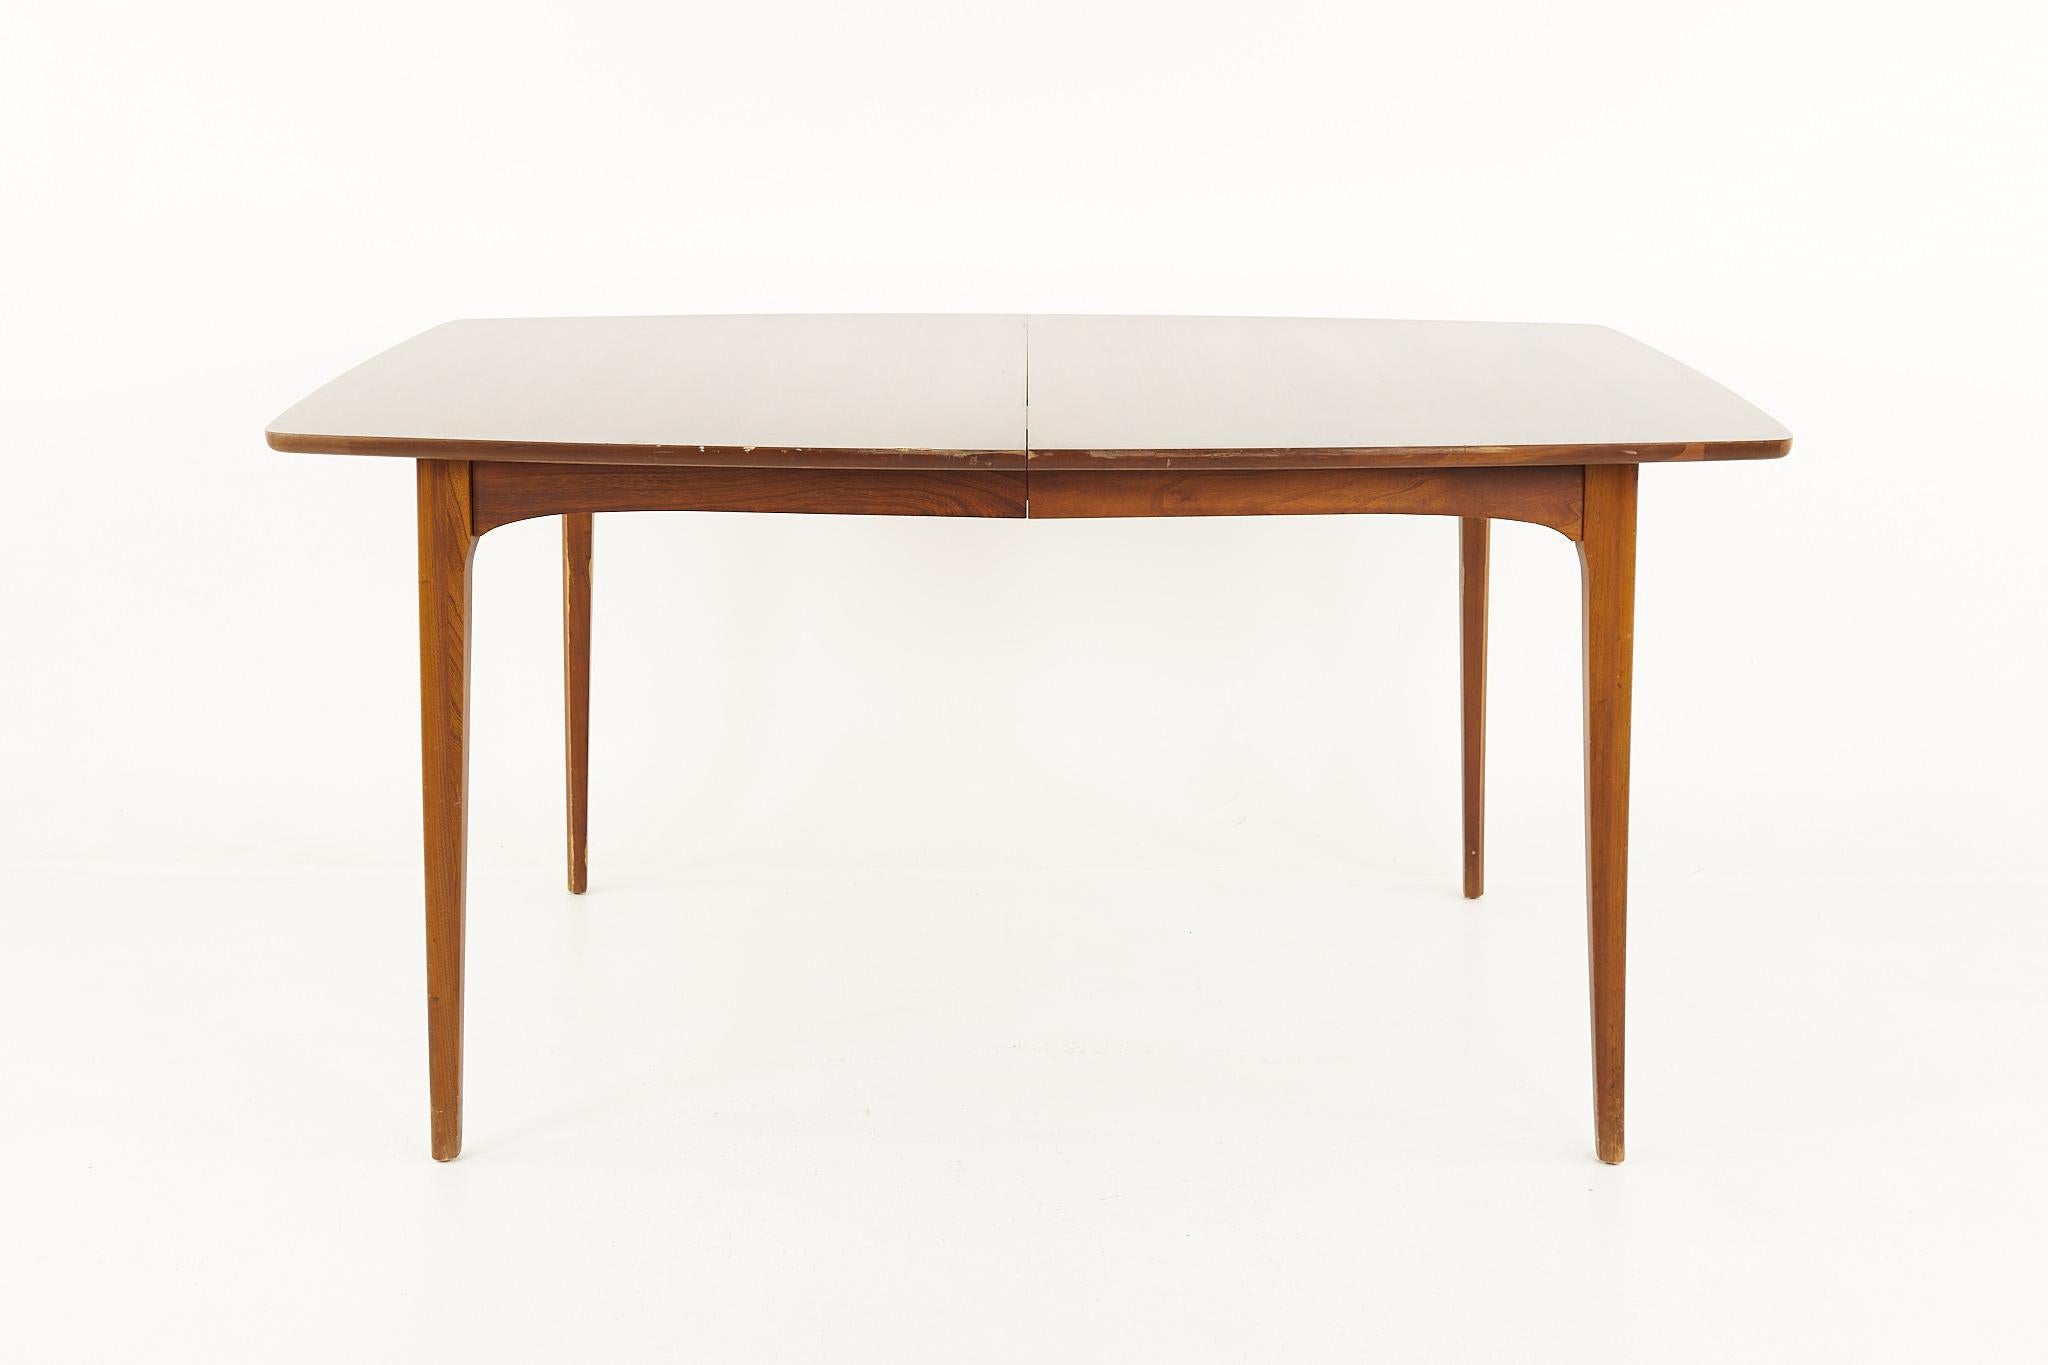 Kent Coffey Perspecta mid century walnut surfboard dining table

This table measures: 60 wide x 42 deep x 29.5 inches high, with a chair clearance of 26.5 inches

All pieces of furniture can be had in what we call restored vintage condition.